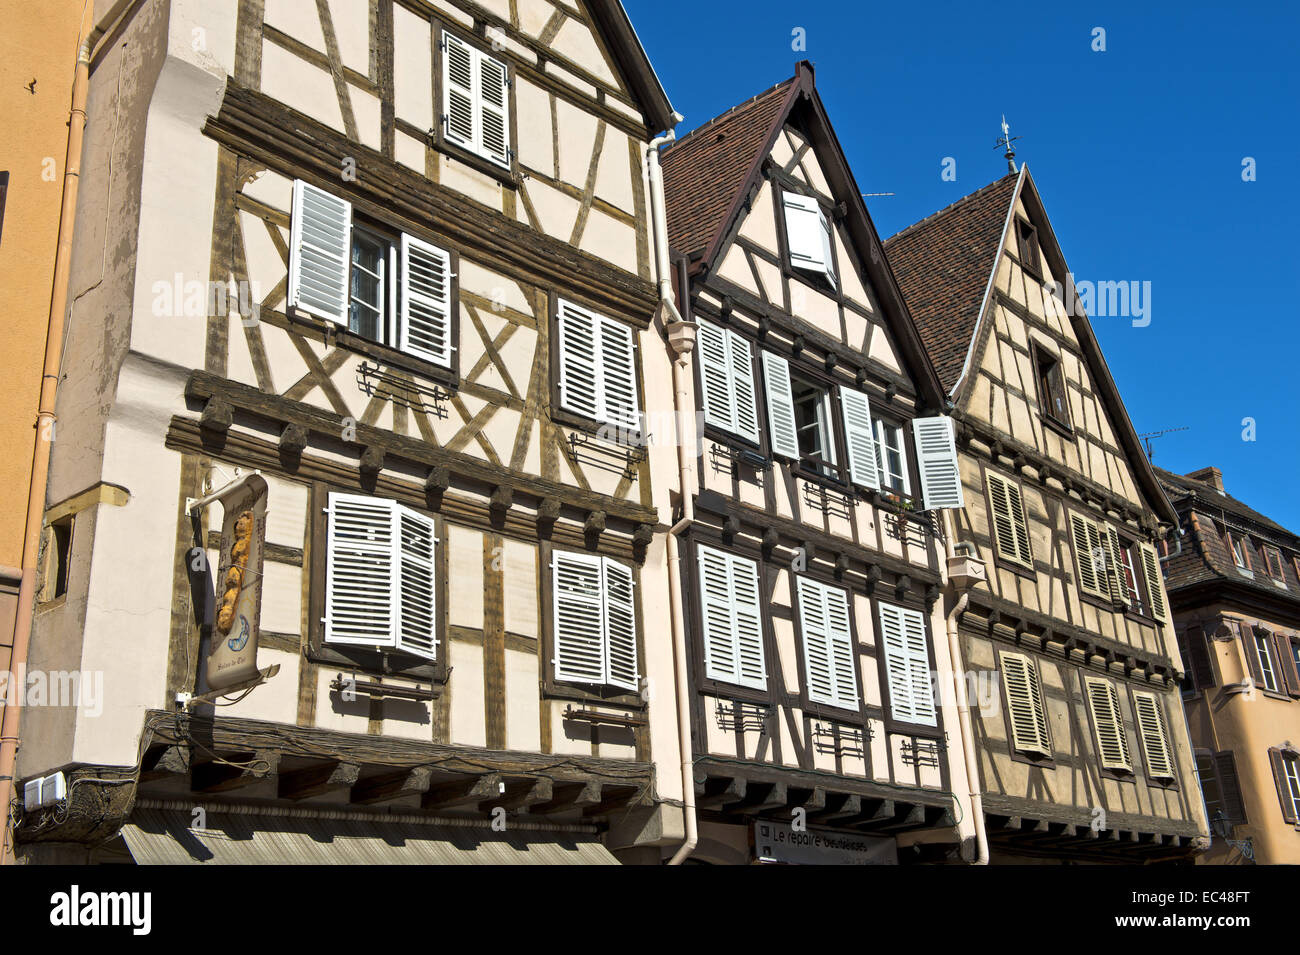 Half-timbered houses in the old town of Colmar, Alsace, France Stock Photo